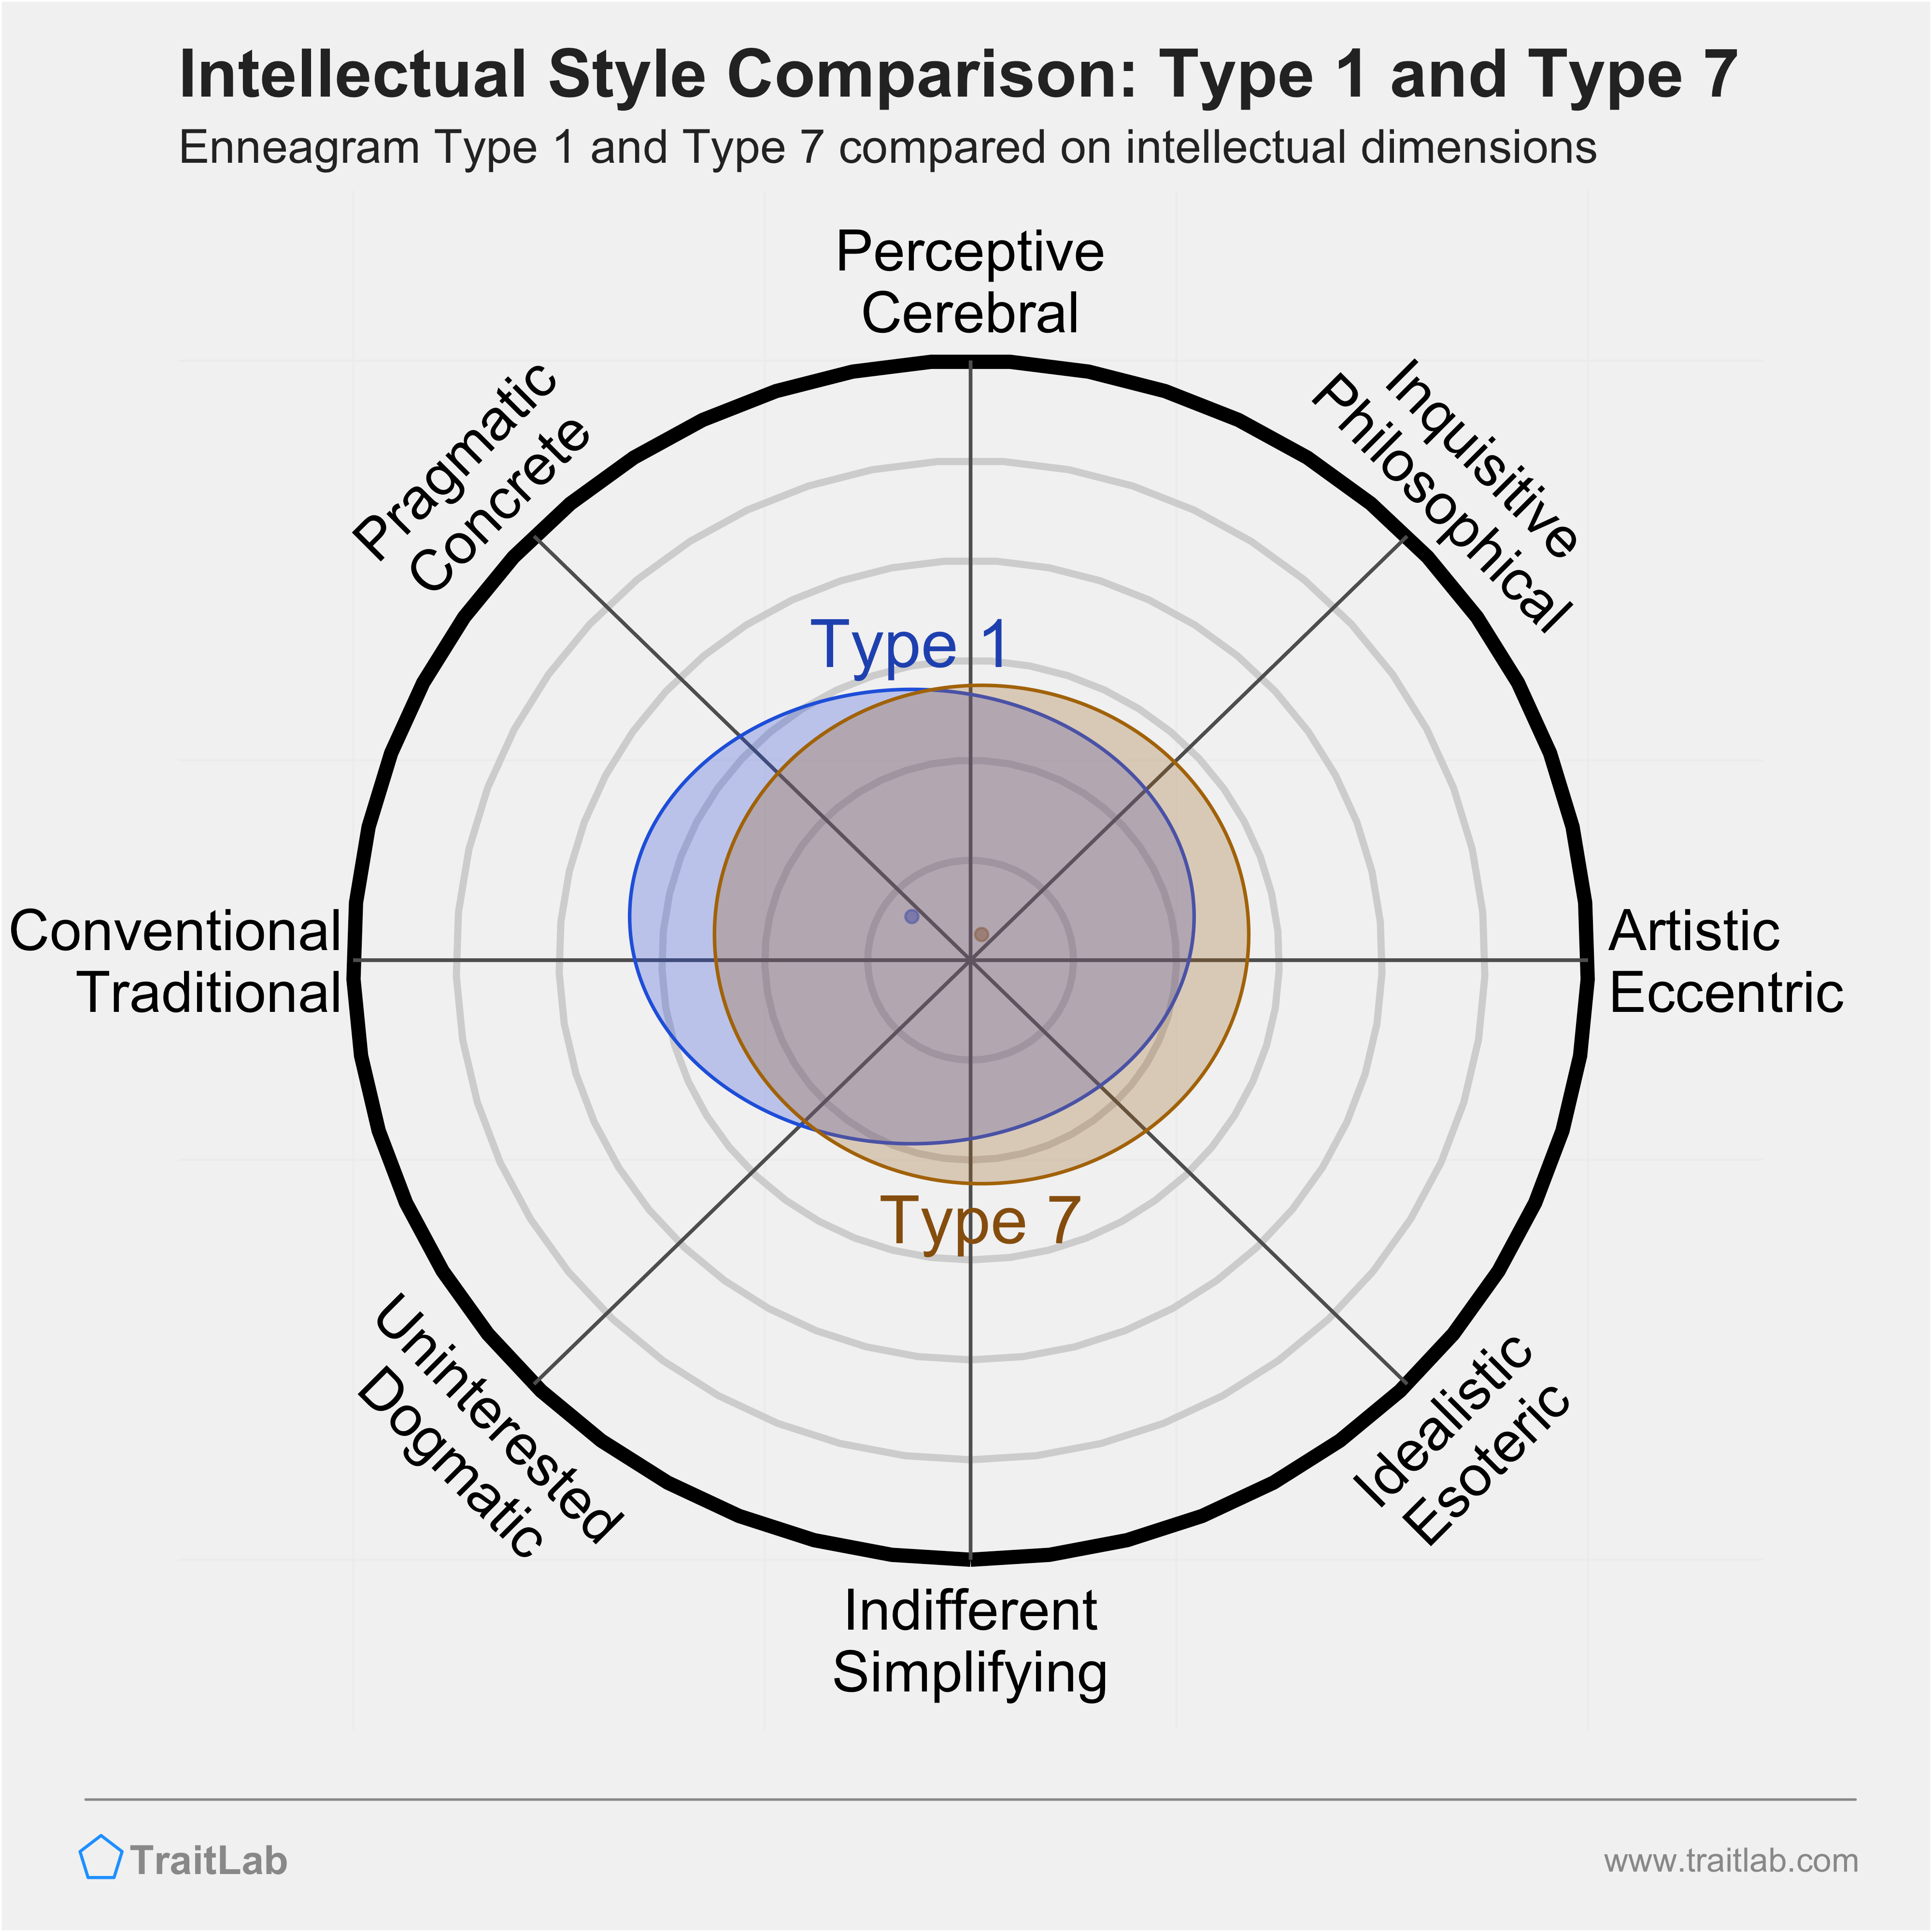 Type 1 and Type 7 comparison across intellectual dimensions